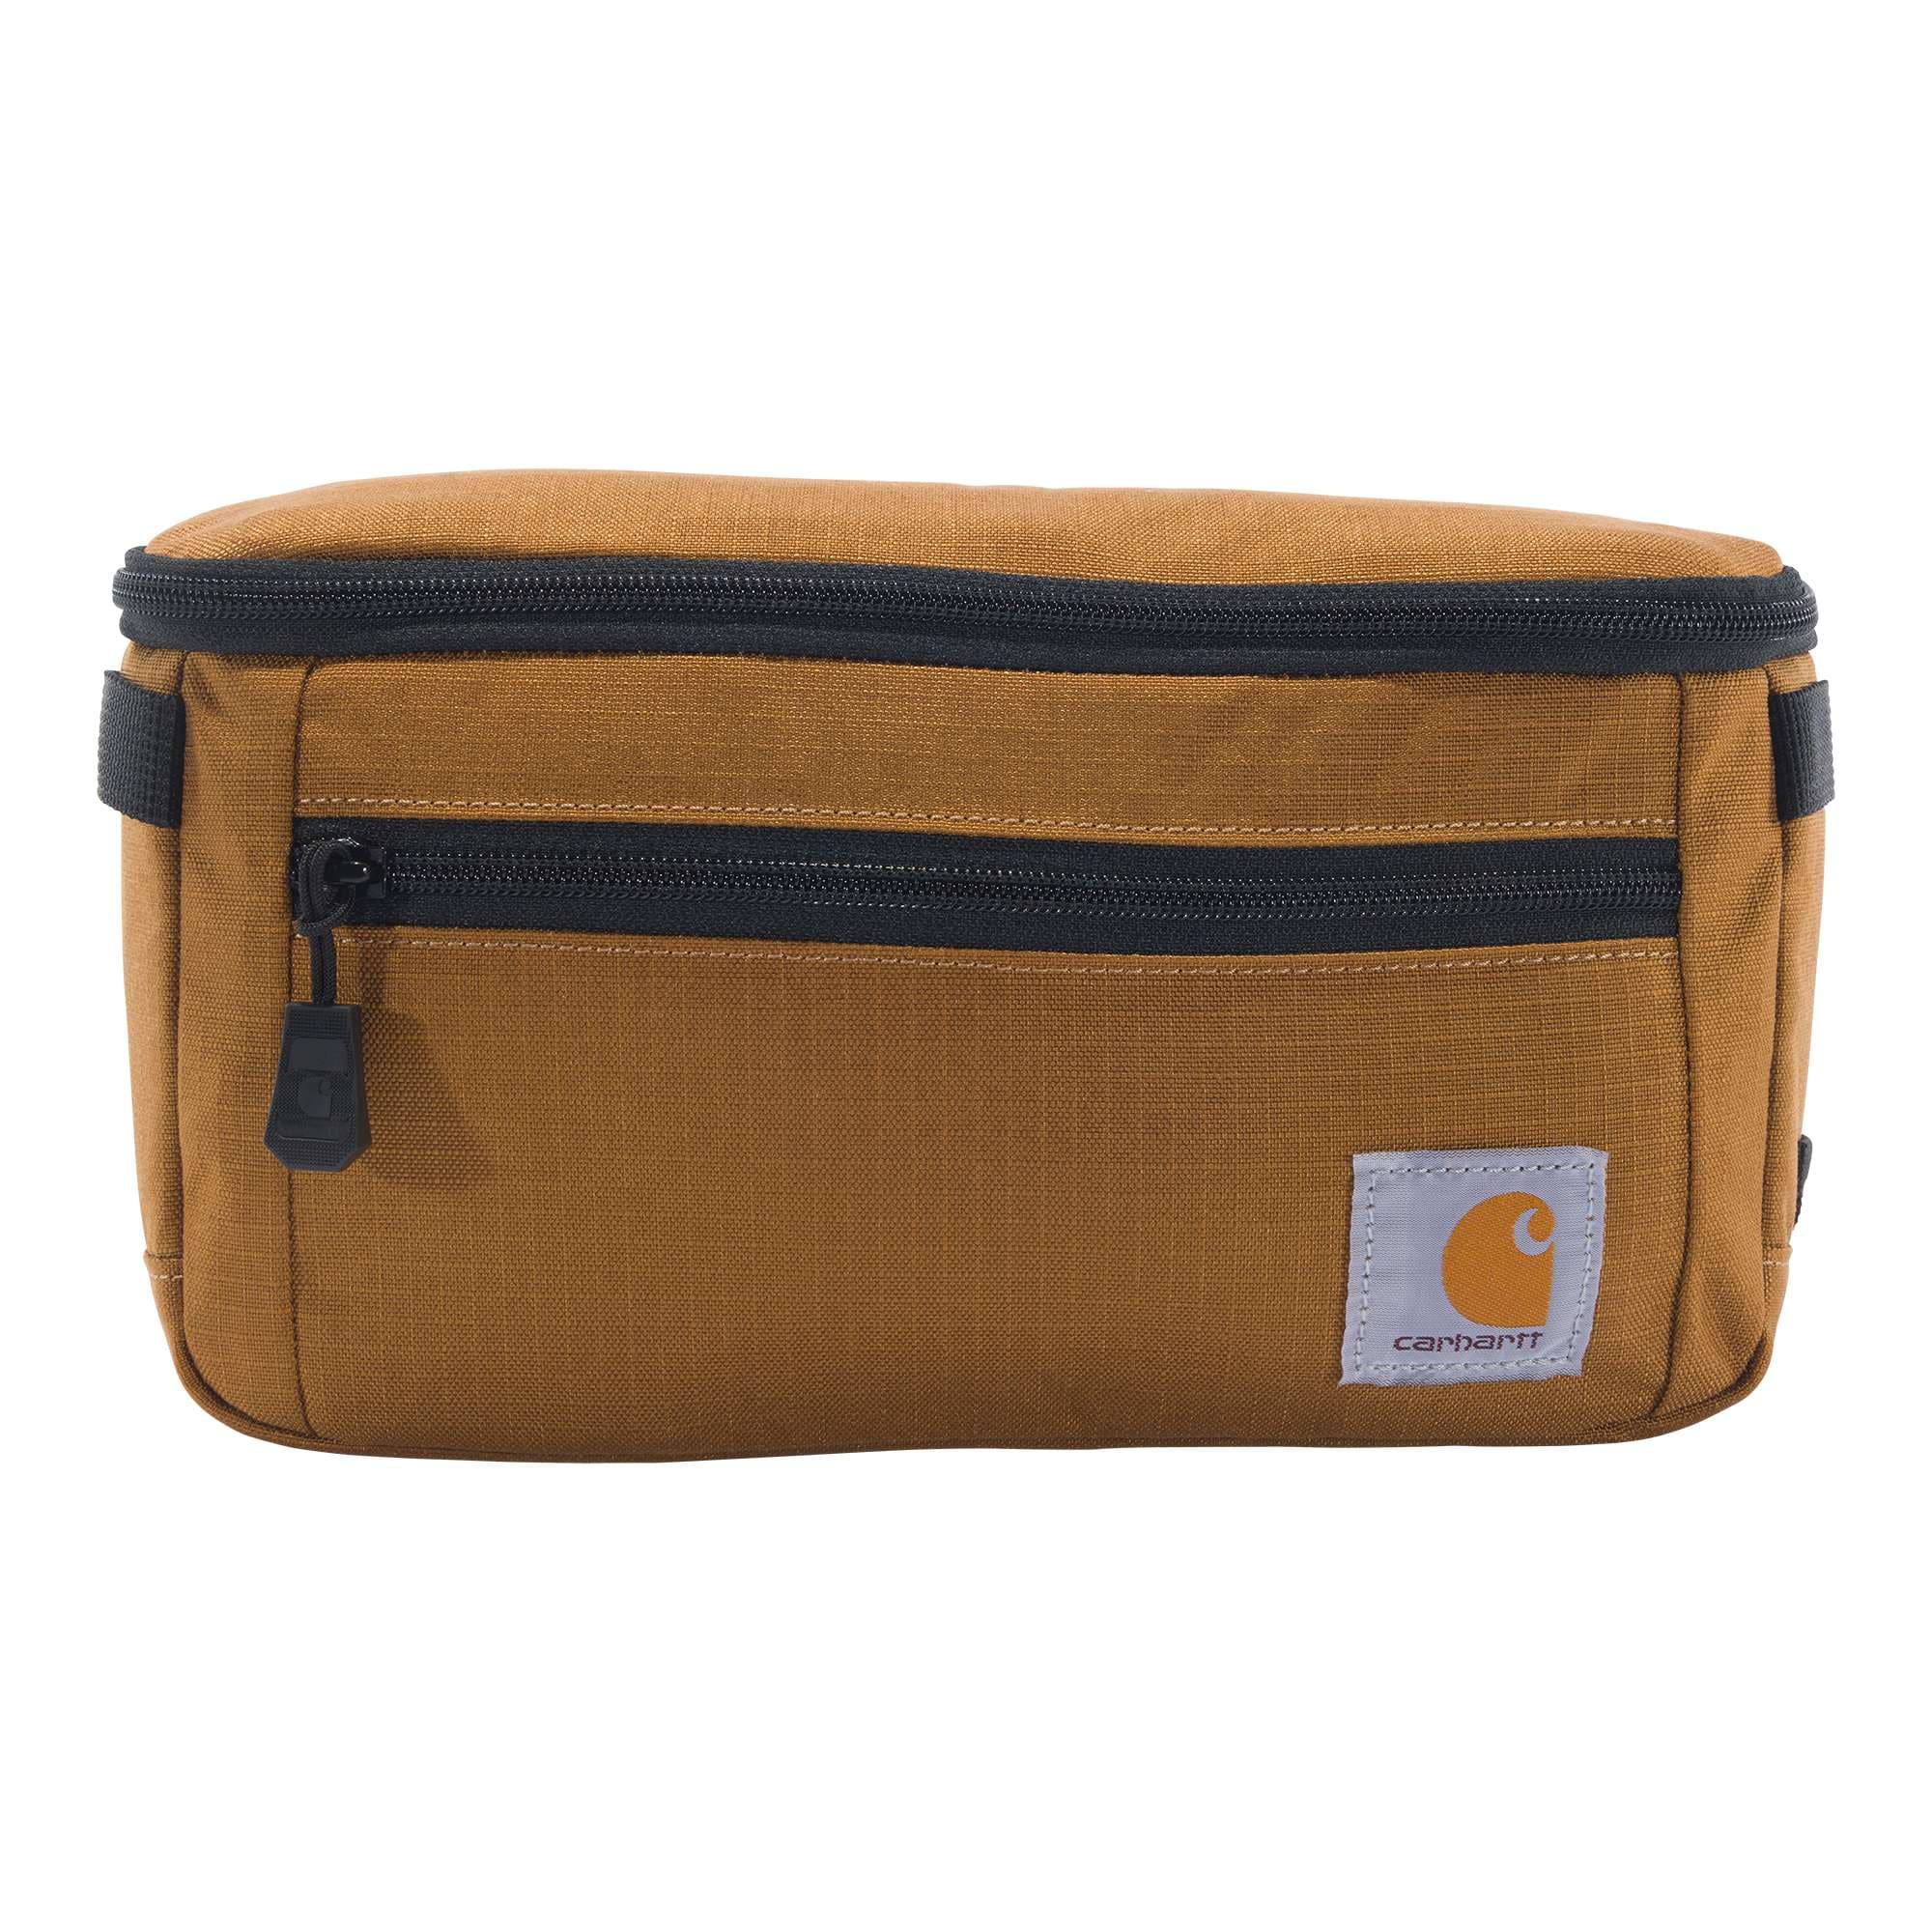 Cargo Series Waist Pack | Father's Day: Outdoor Gifts | Carhartt